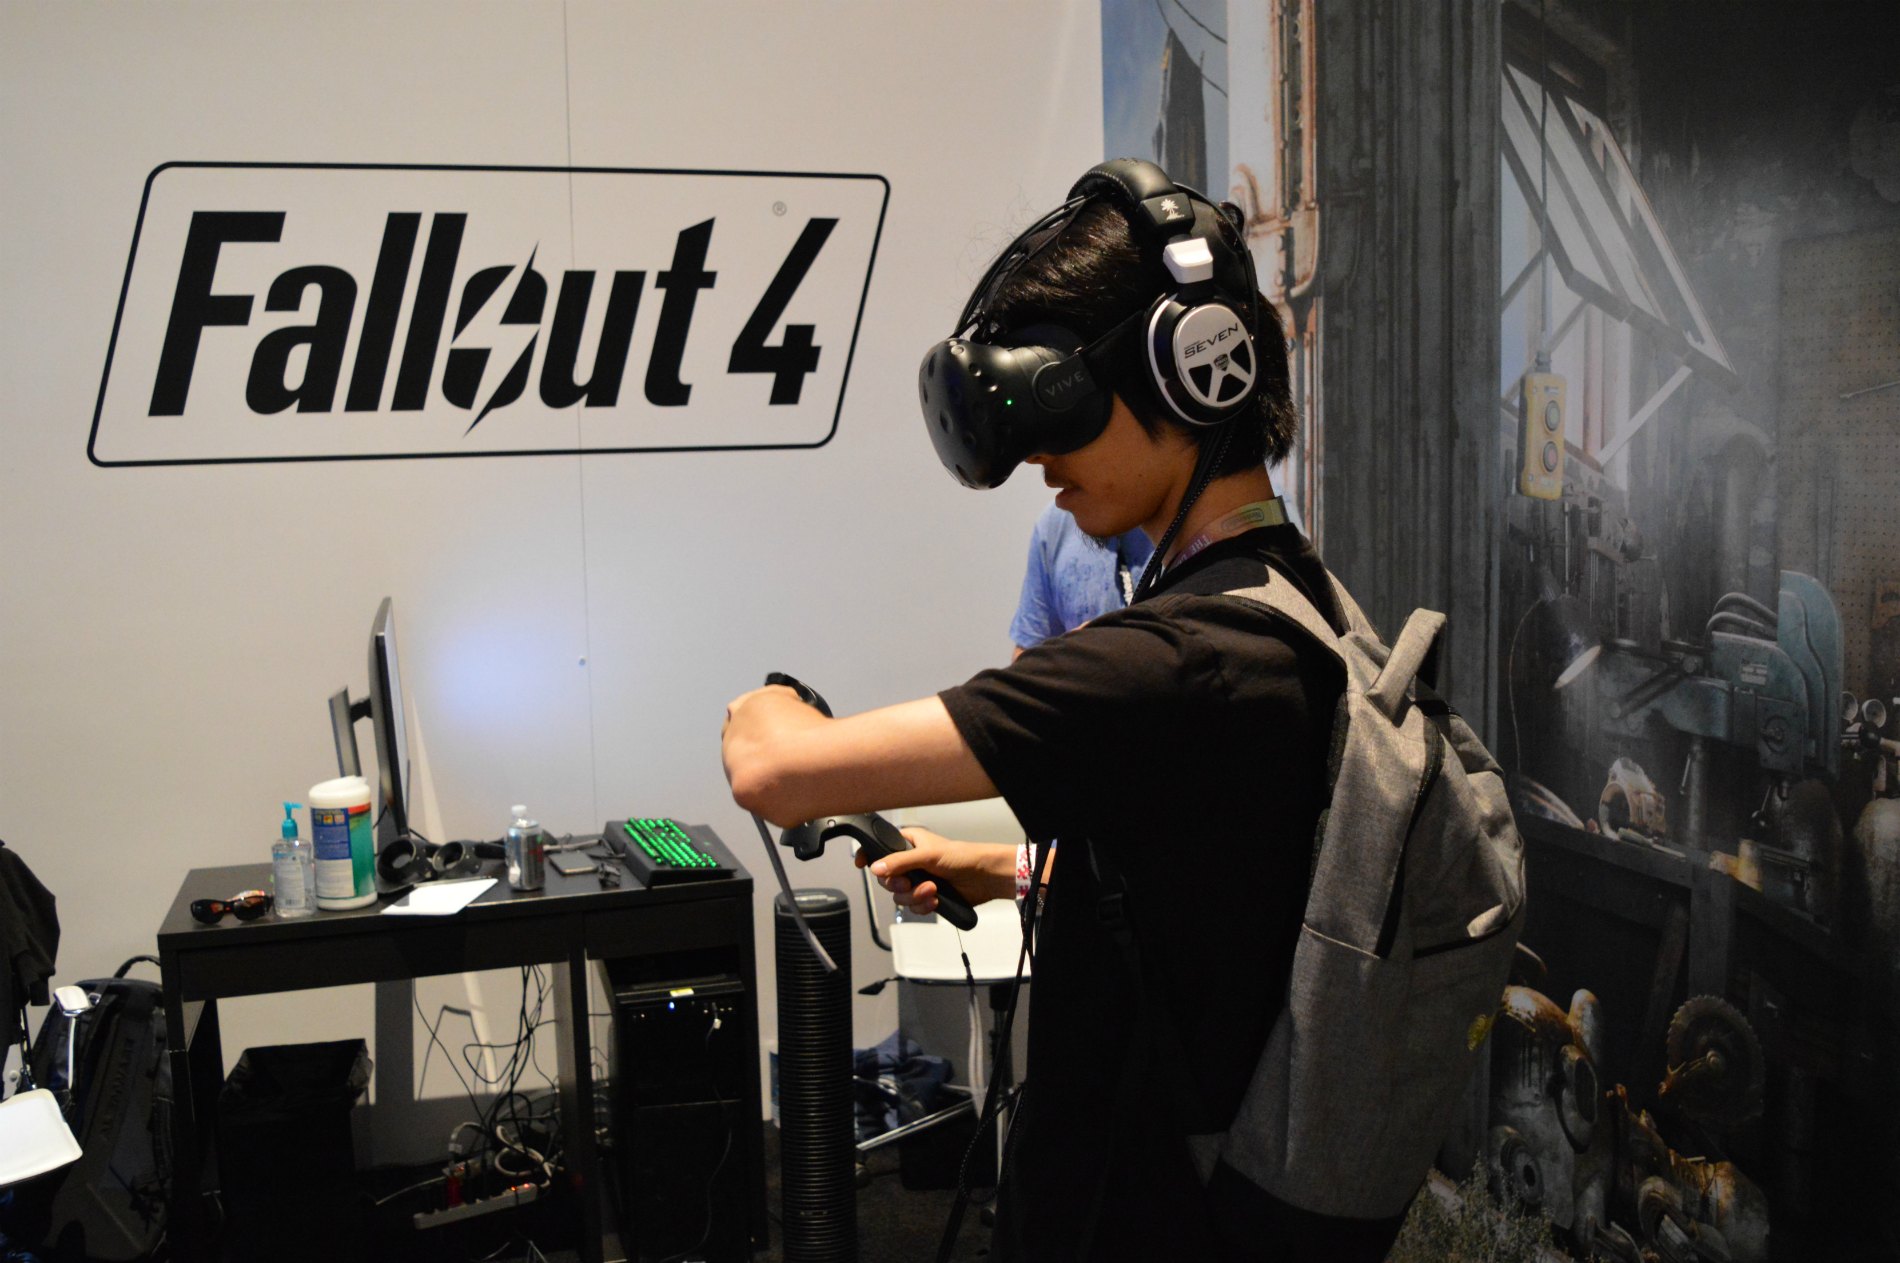 Man demoing Fallout 4 VR with the HTC Vive virtual reality HMD.